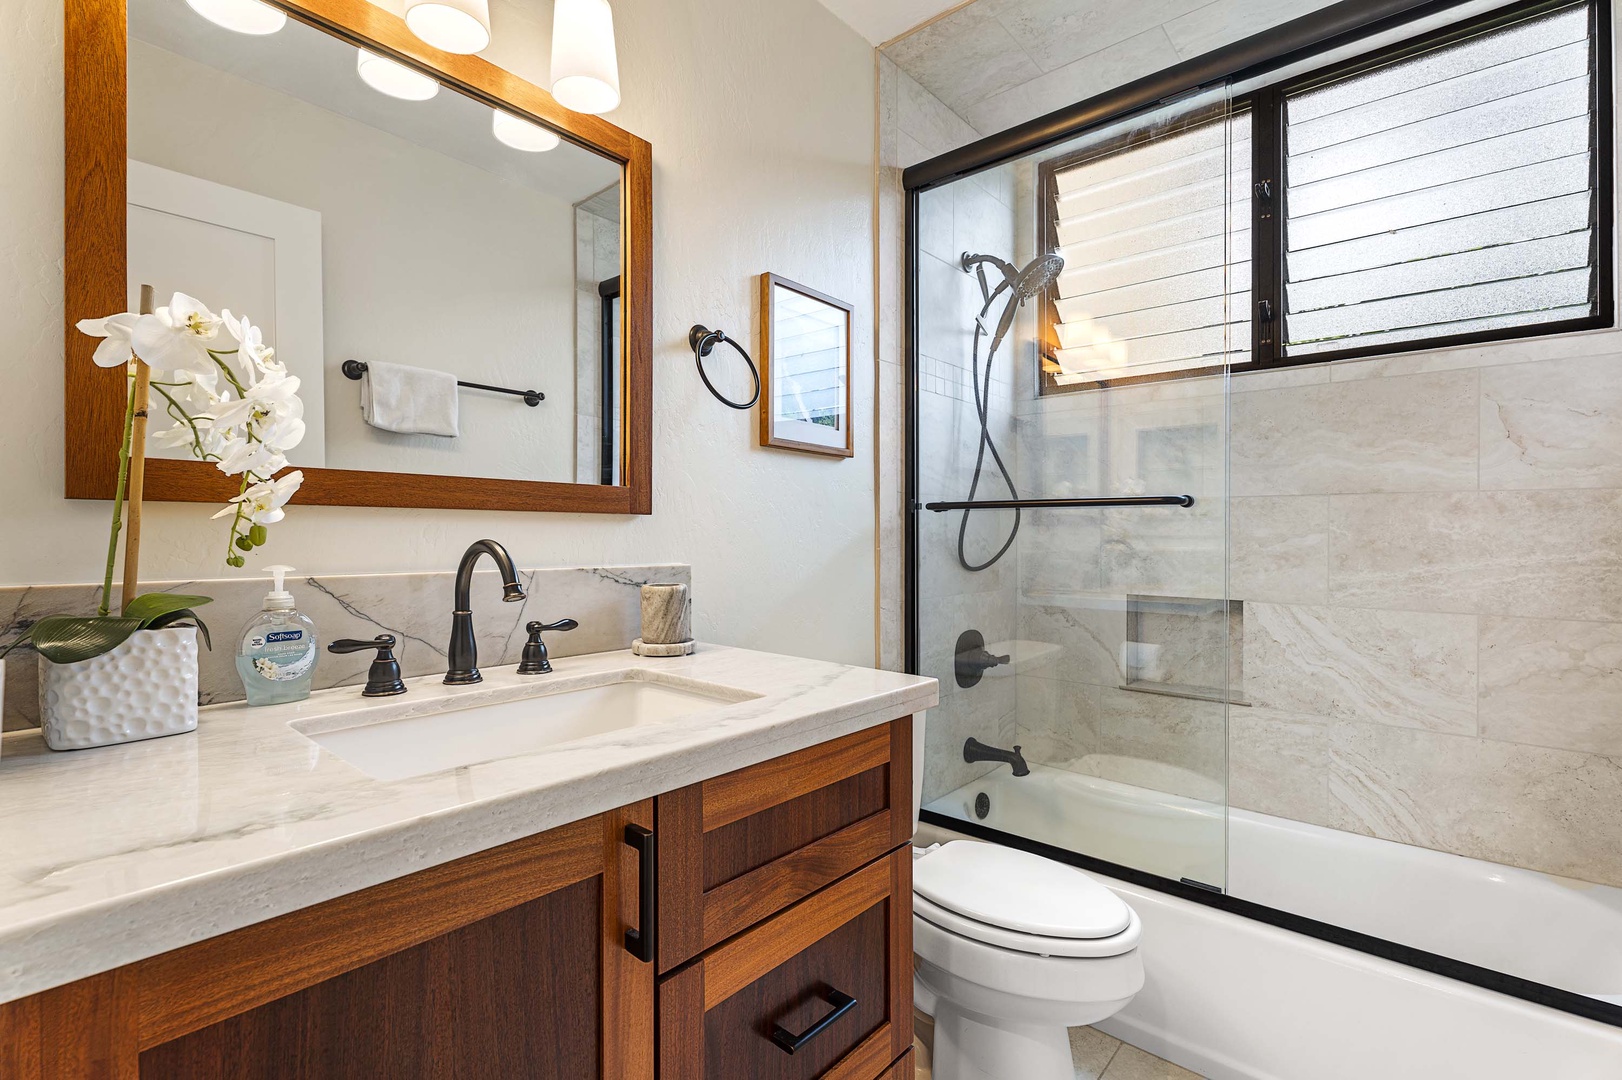 Kailua Kona Vacation Rentals, Keauhou Kona Surf & Racquet 2101 - The full-size guest bathroom has been fully renovated, with a shower/tub combo and includes beautiful tile work throughout.